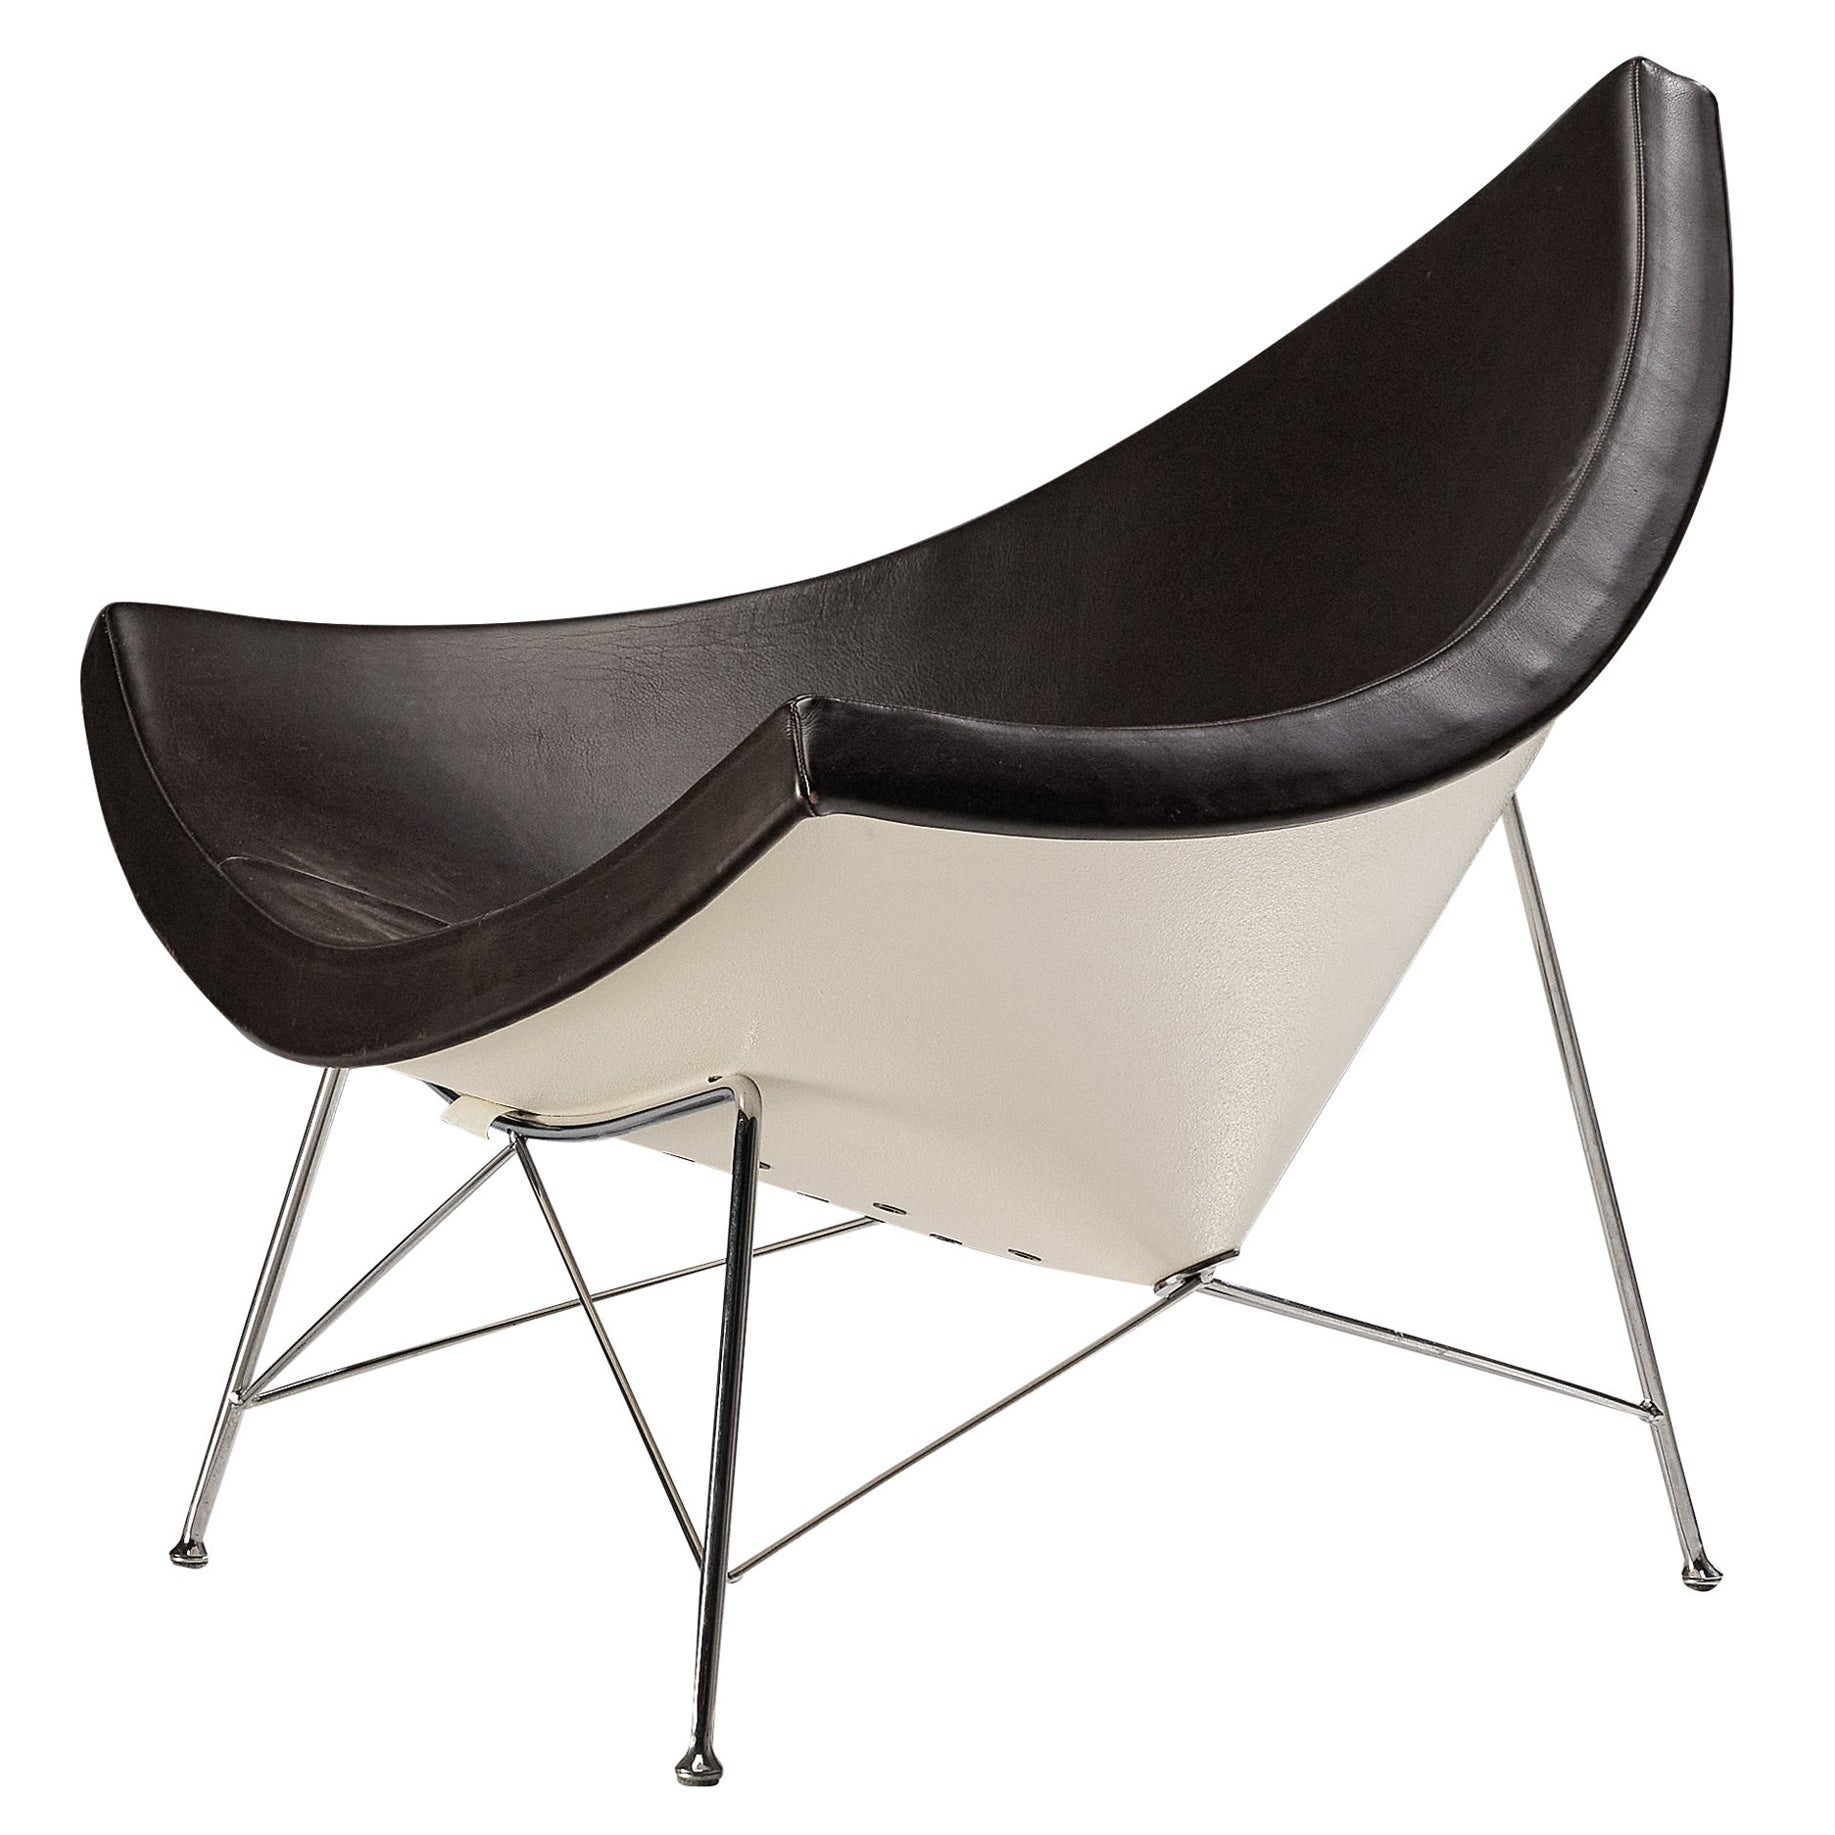 Iconic George Nelson 'Coconut' Lounge Chair For Sale at 1stDibs